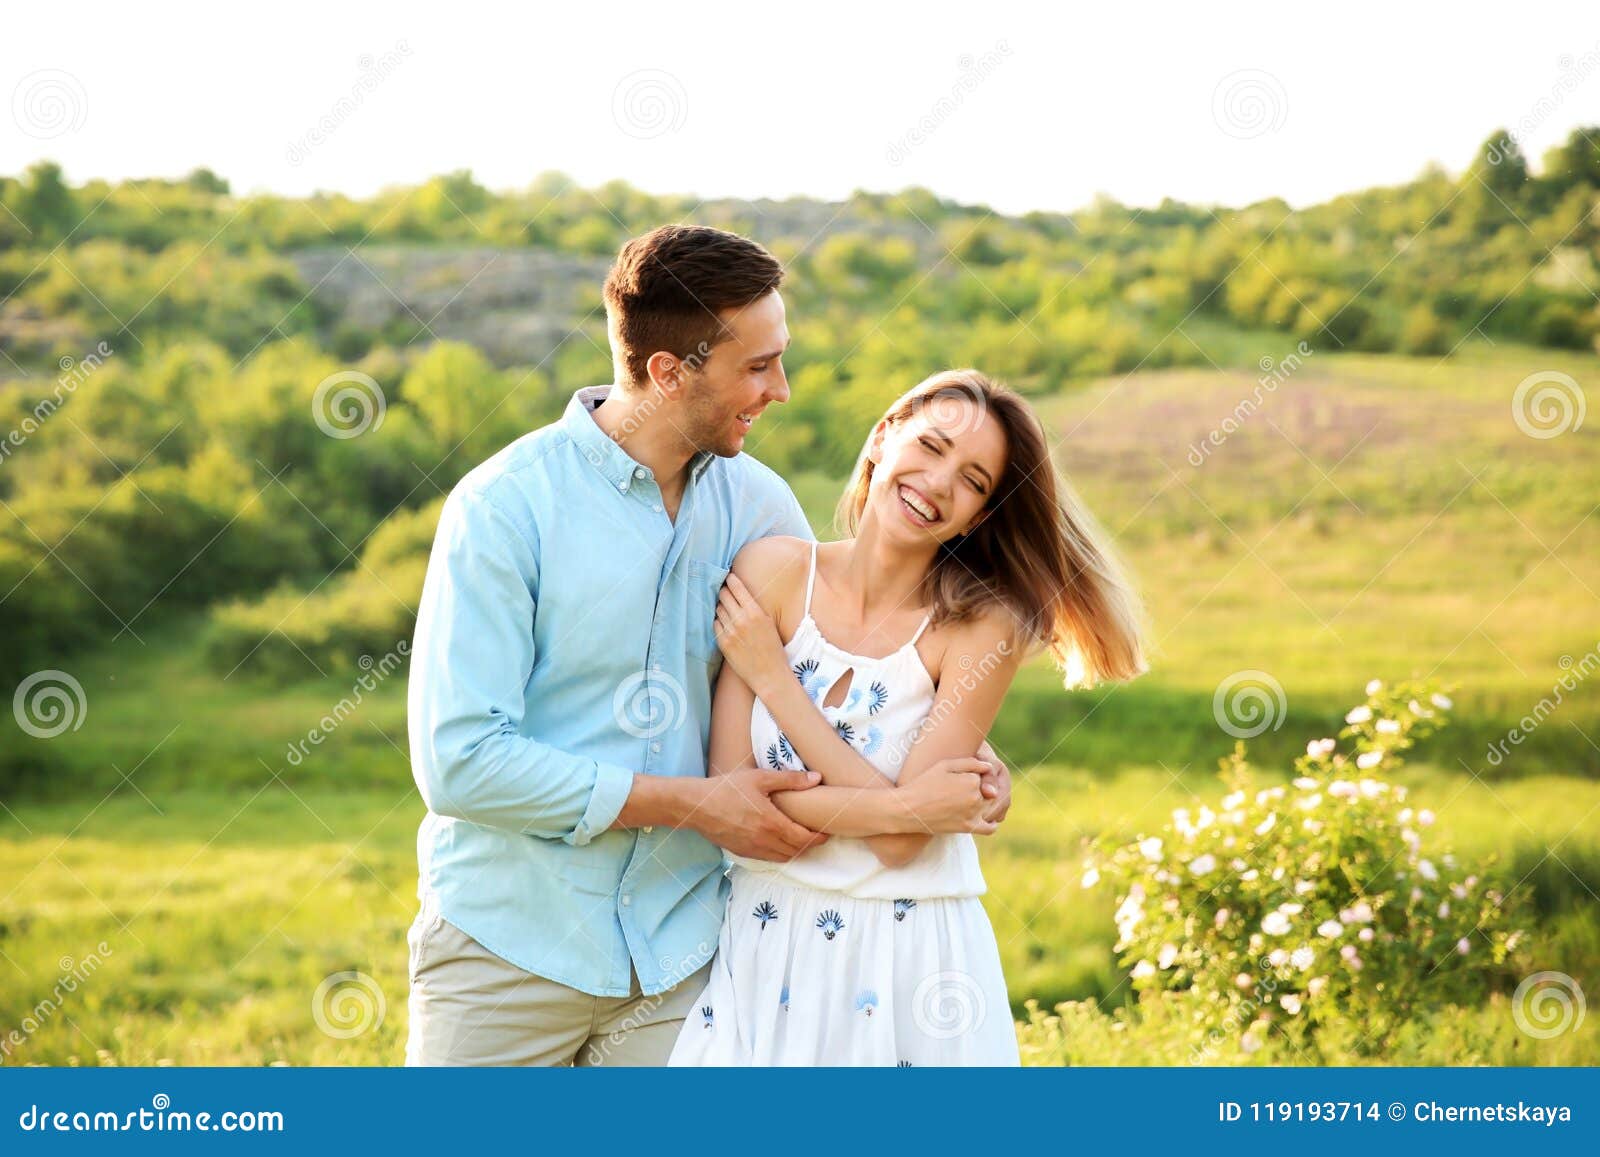 Cute Couple In Love Posing Outdoors On Sunny Day Stock Photo